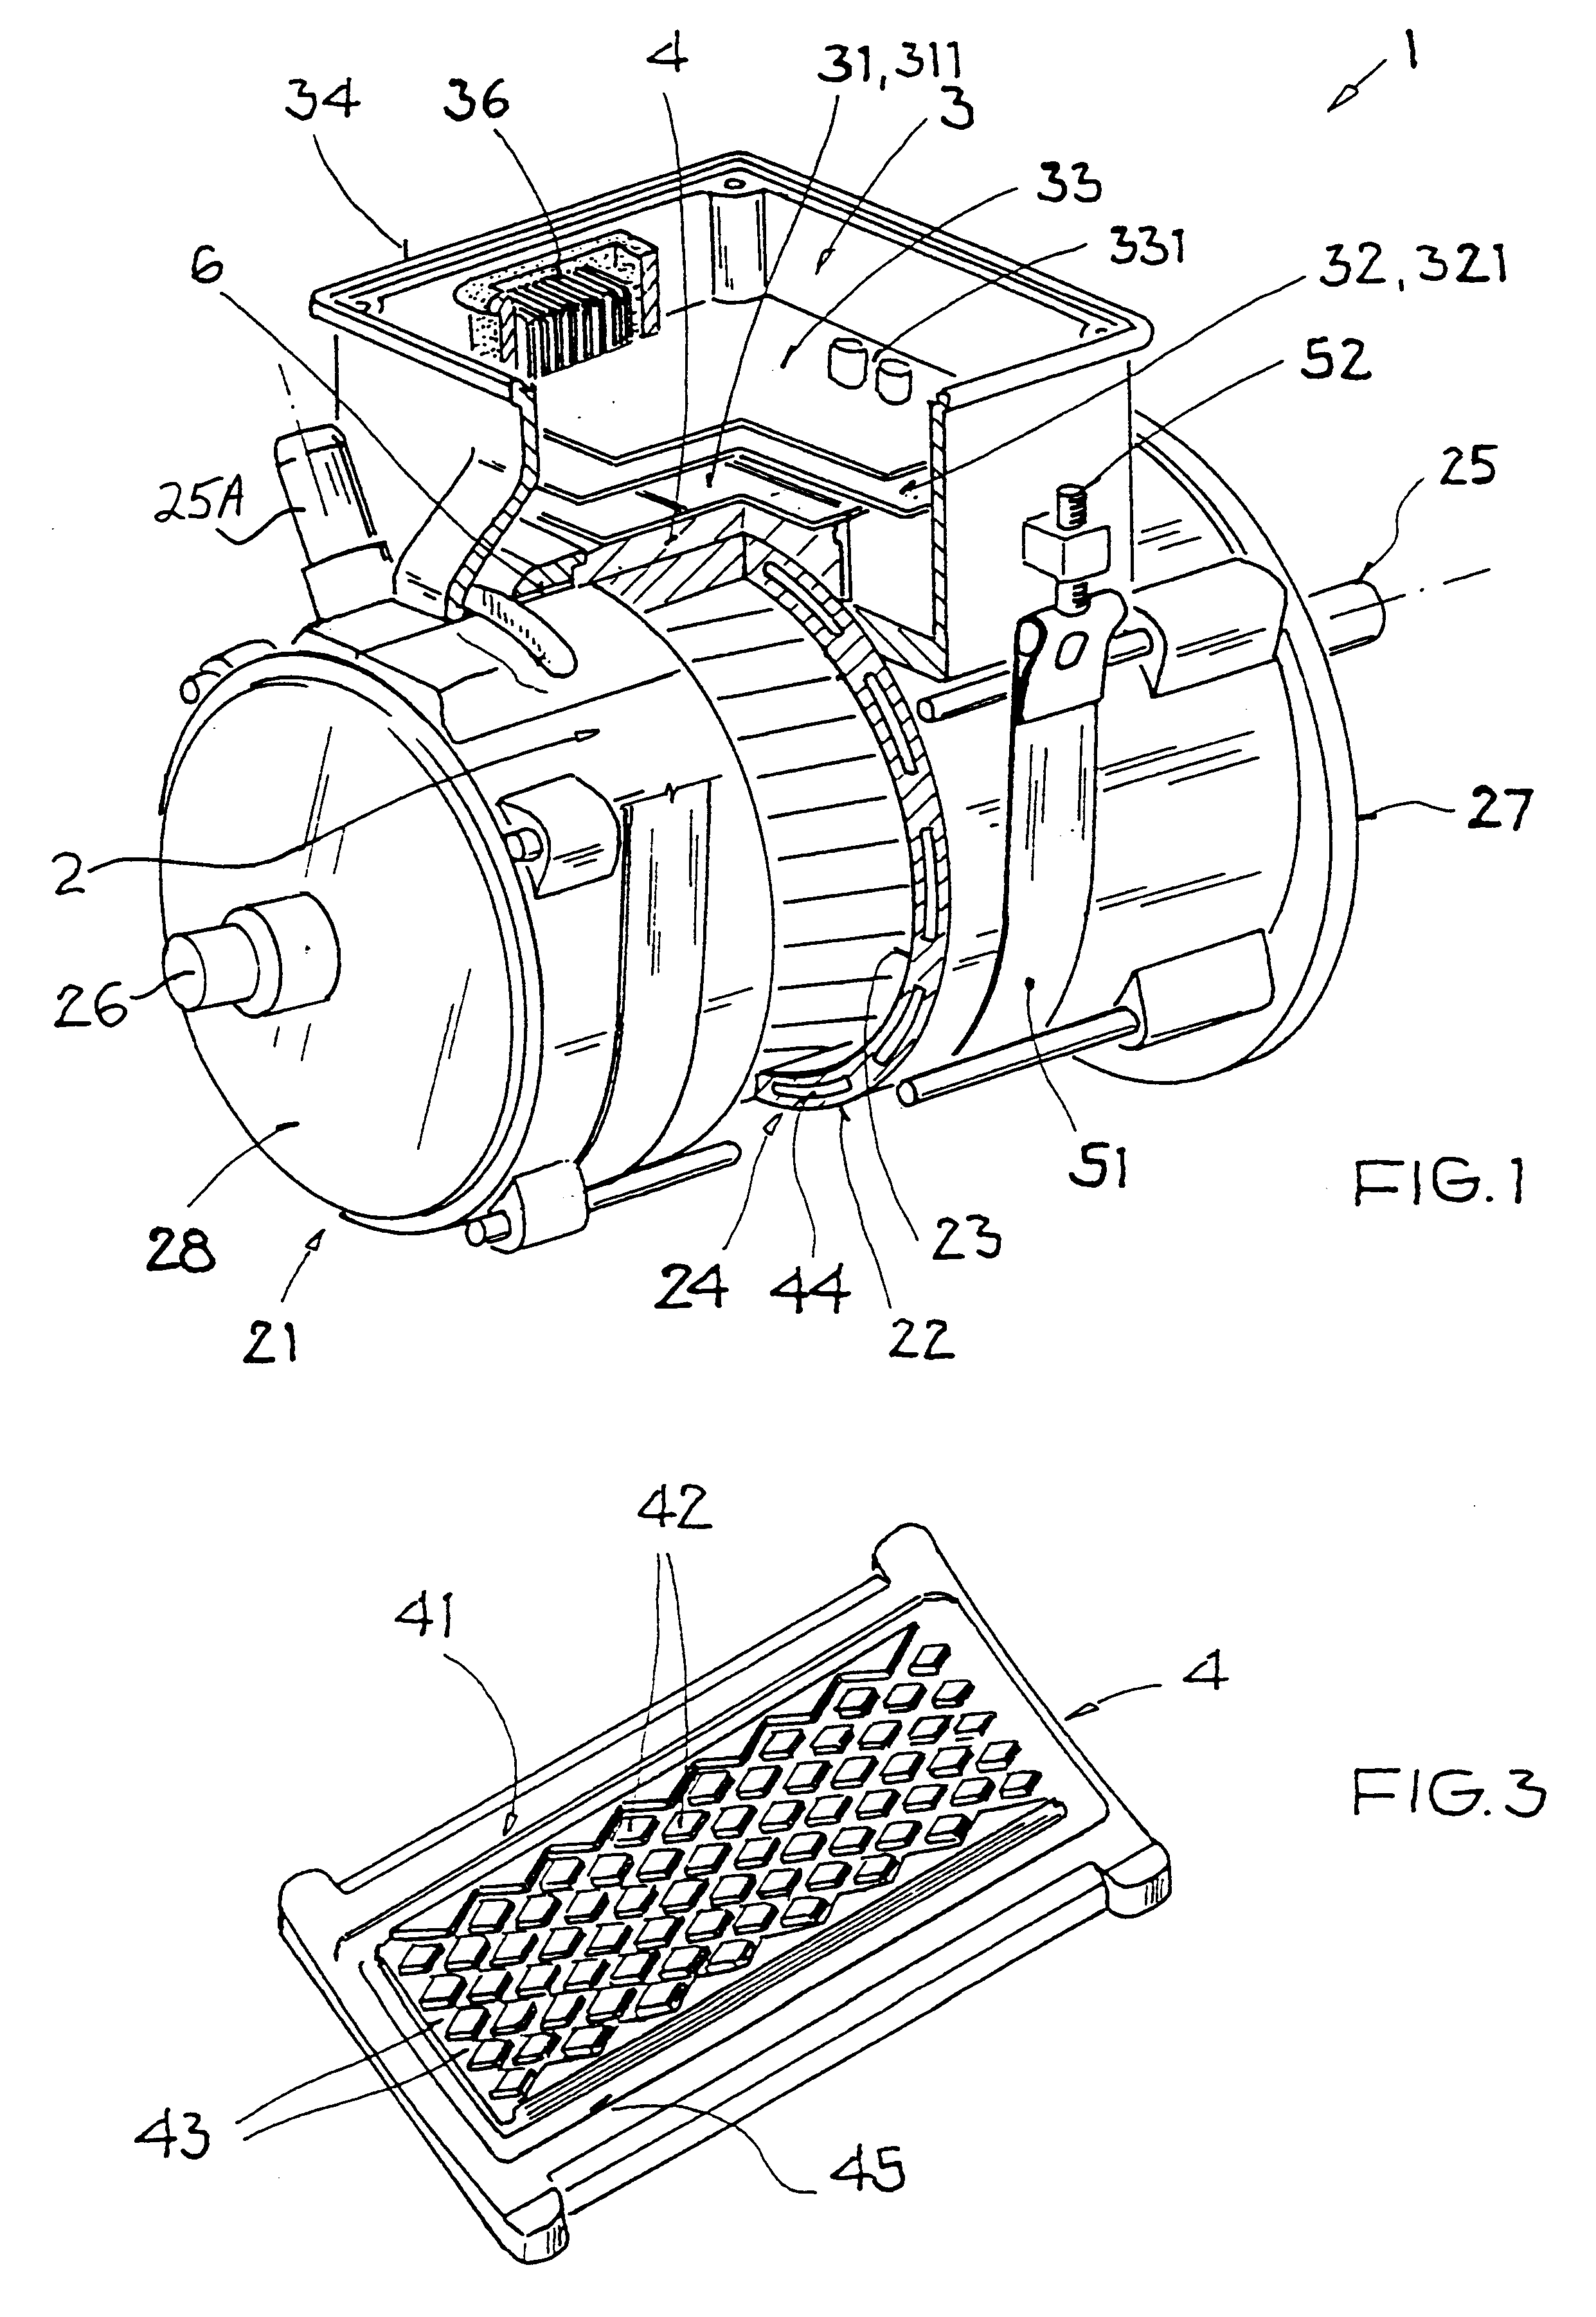 Integrated electric drive unit including an electric motor and an electronic control and monitoring module